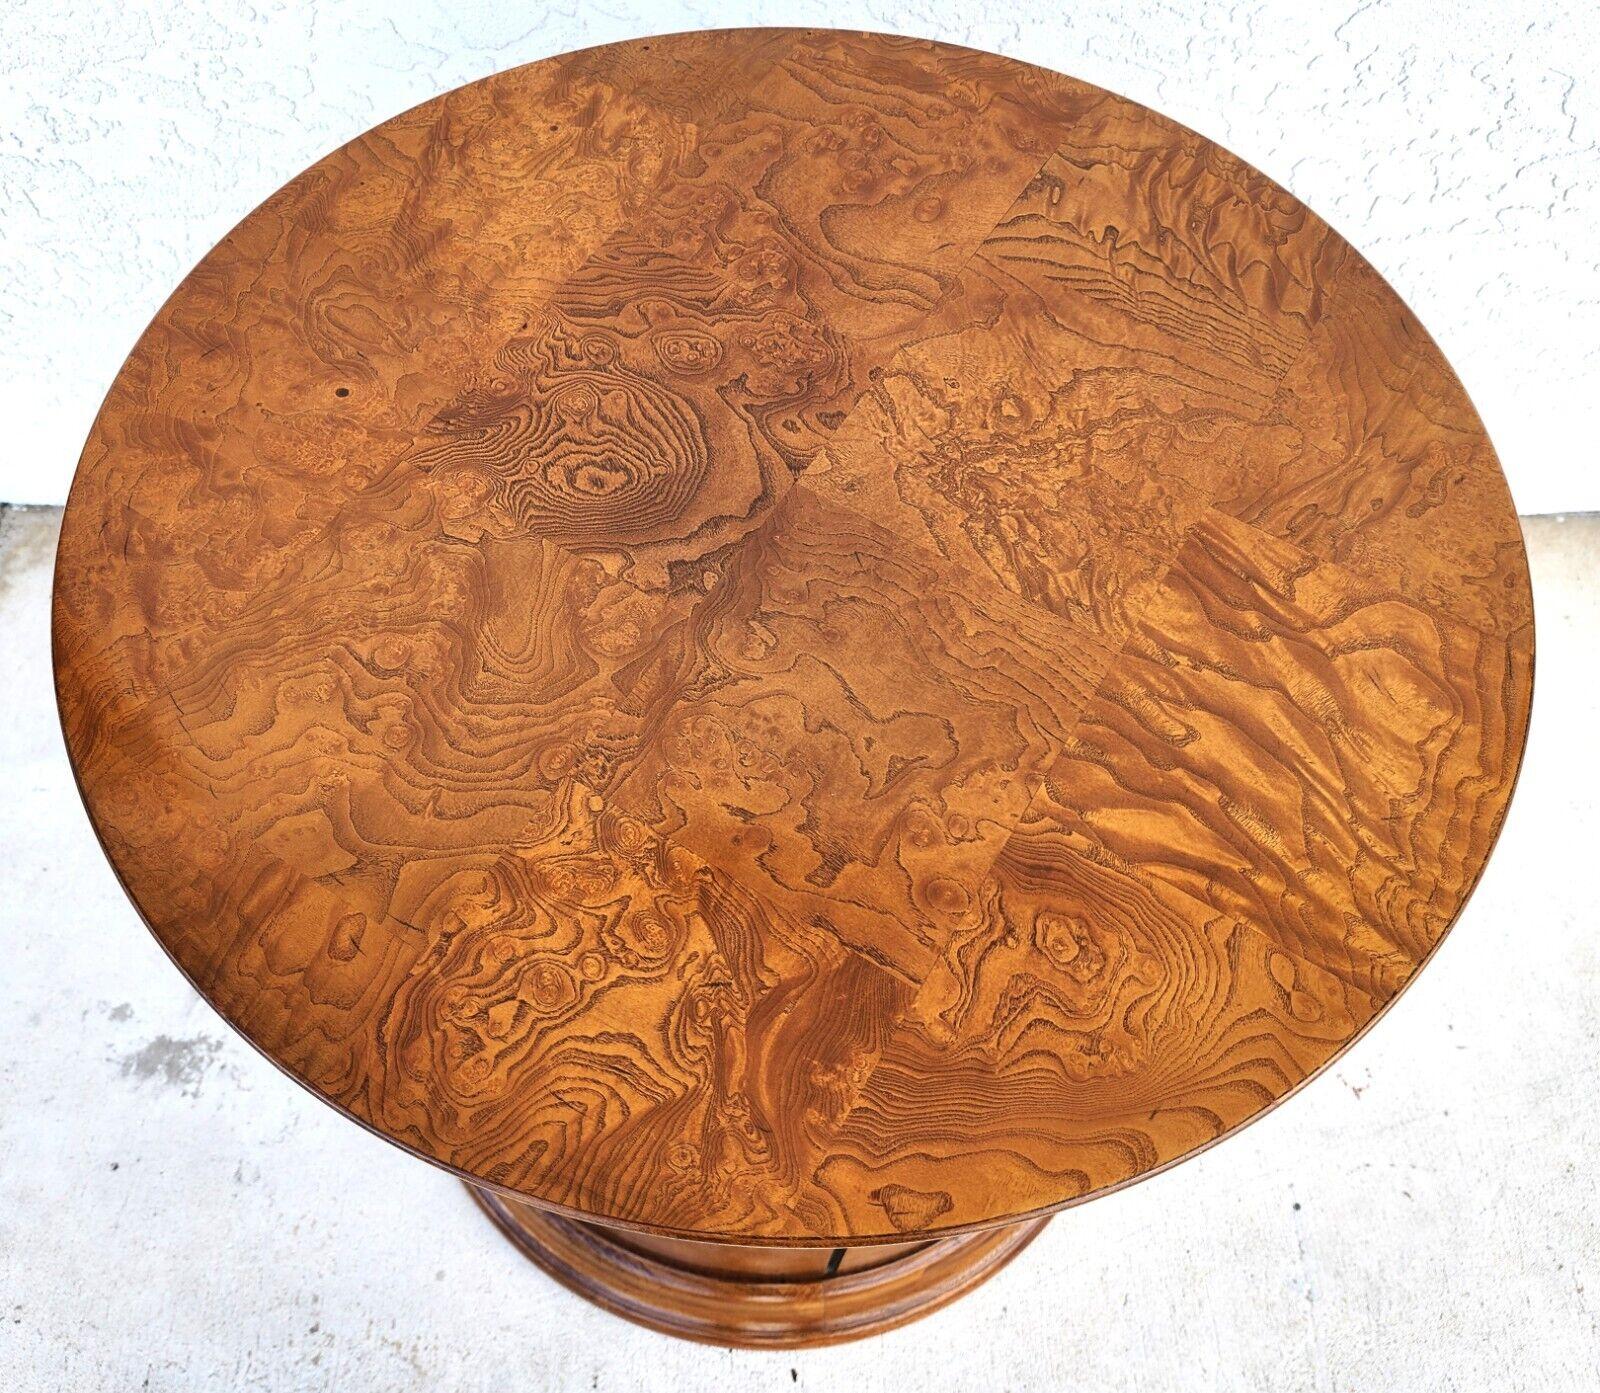 Offering One Of Our Recent Palm Beach Estate Fine Furniture Acquisitions Of A
Side End Drum Table in the Henredon Style
Solid real wood construction with vibrant Burl veneer, 2 doors and 1 shelf (non adjustable).
It's a very solid, heavy, and